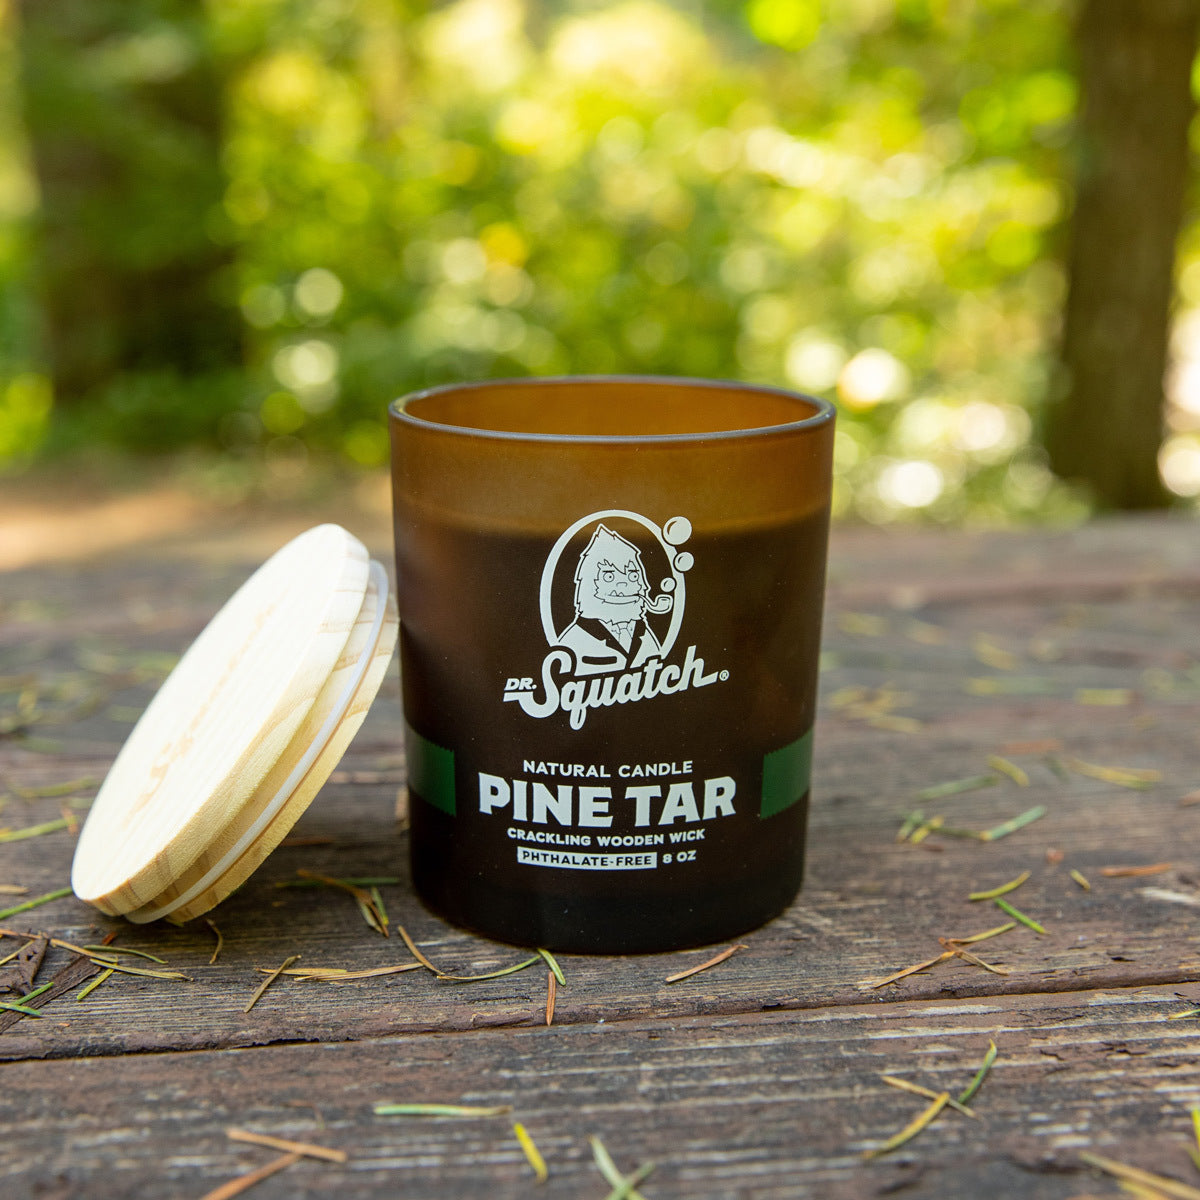 Dr Squatch Pine Tar Candle 